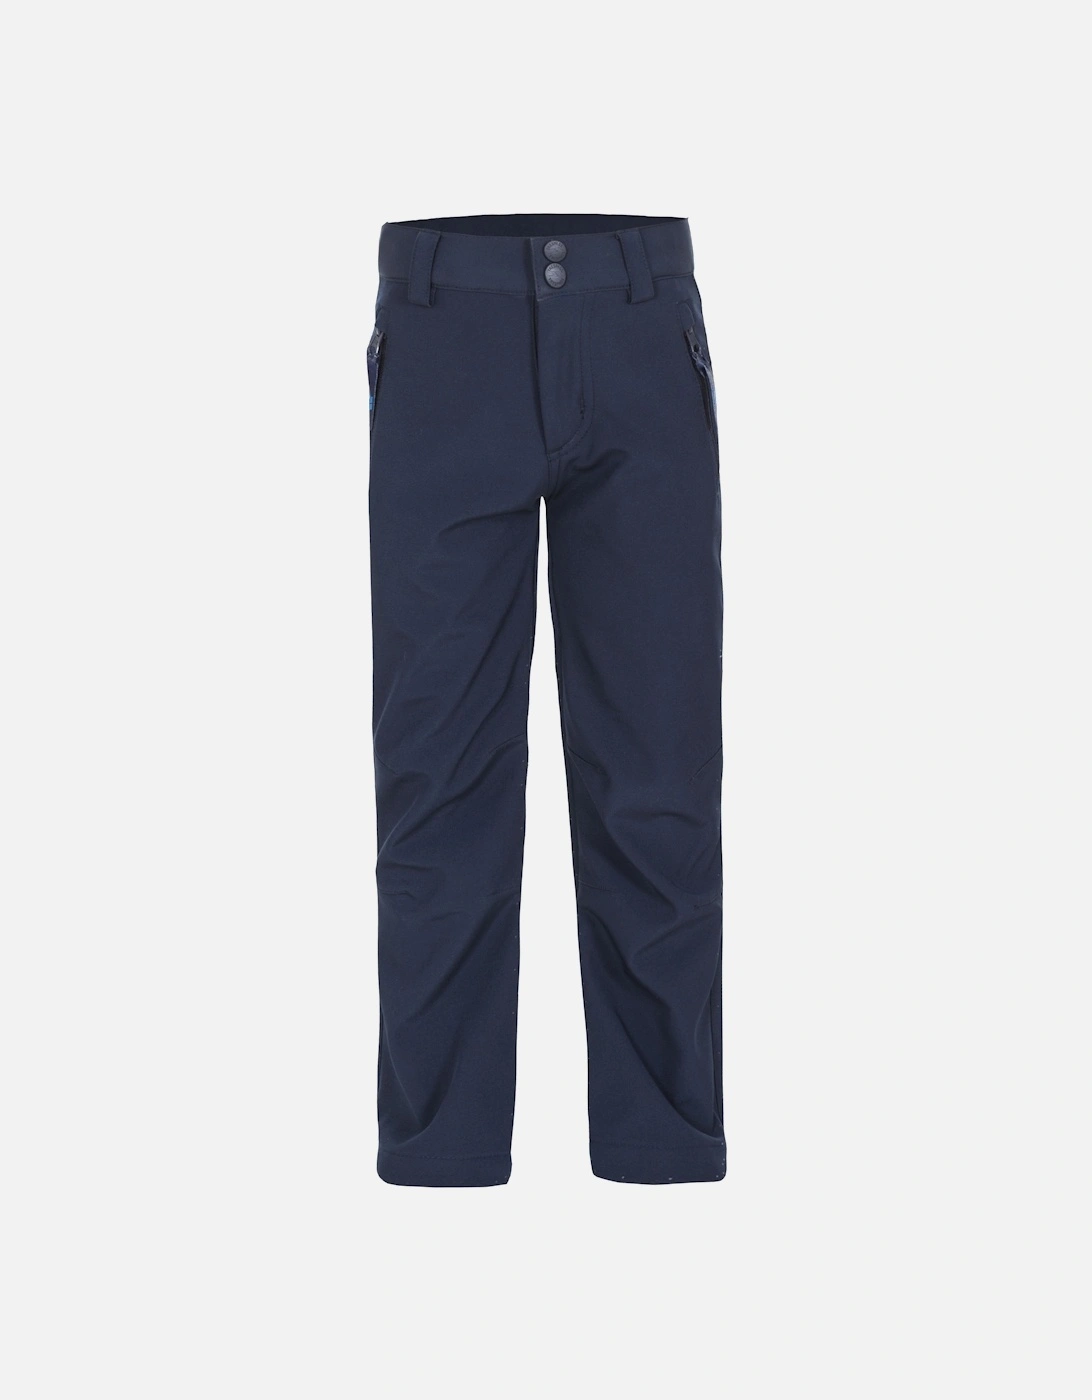 Childrens/Kids Galloway Softshell Trousers, 5 of 4